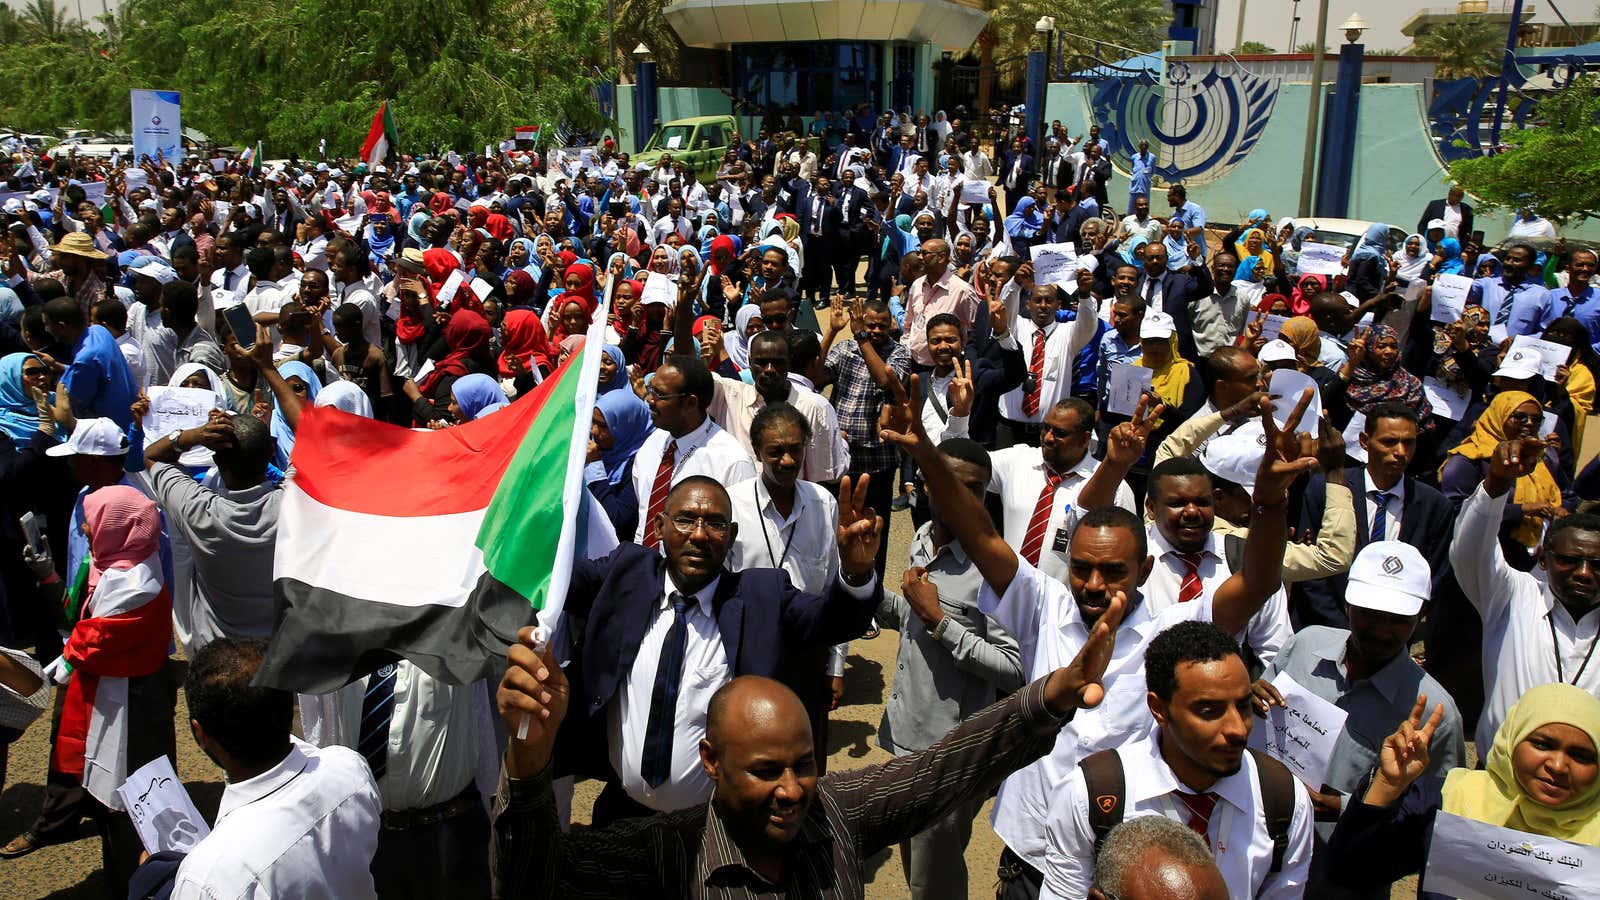 Members of Sudan’s alliance of opposition and protest groups in Khartoum last month